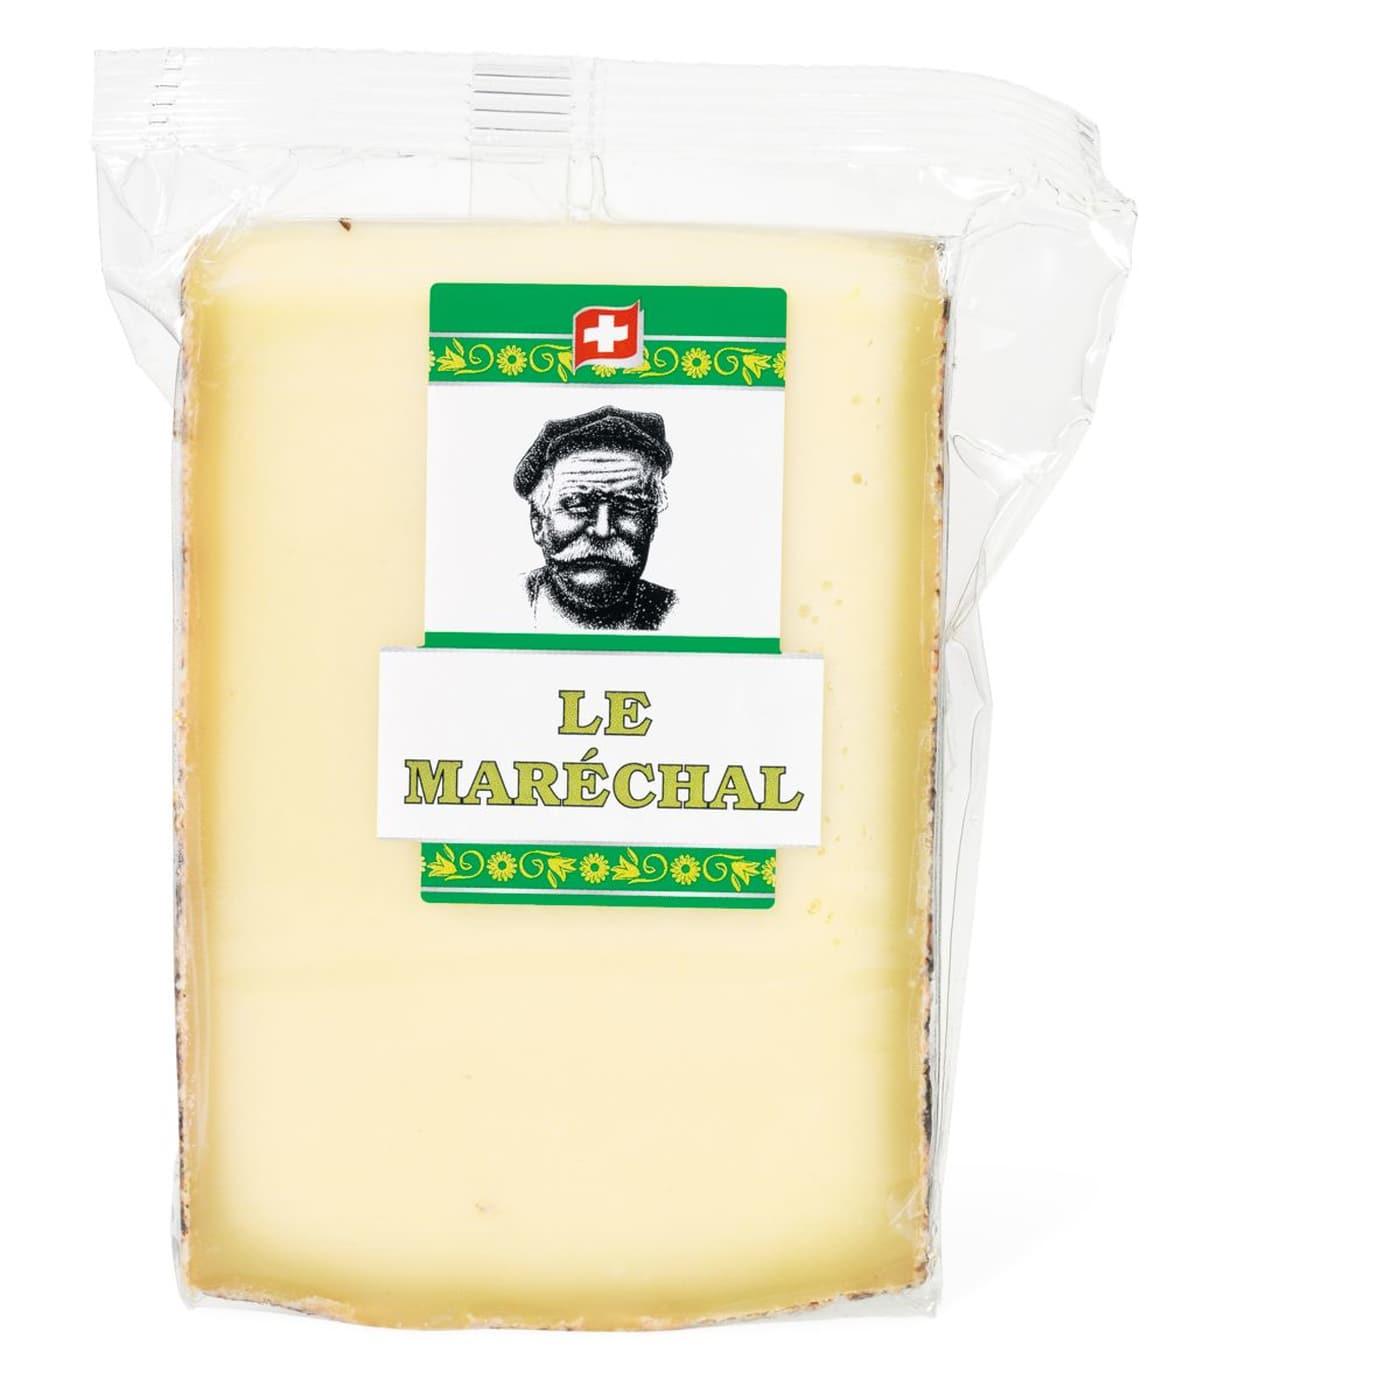 Marechal cheese